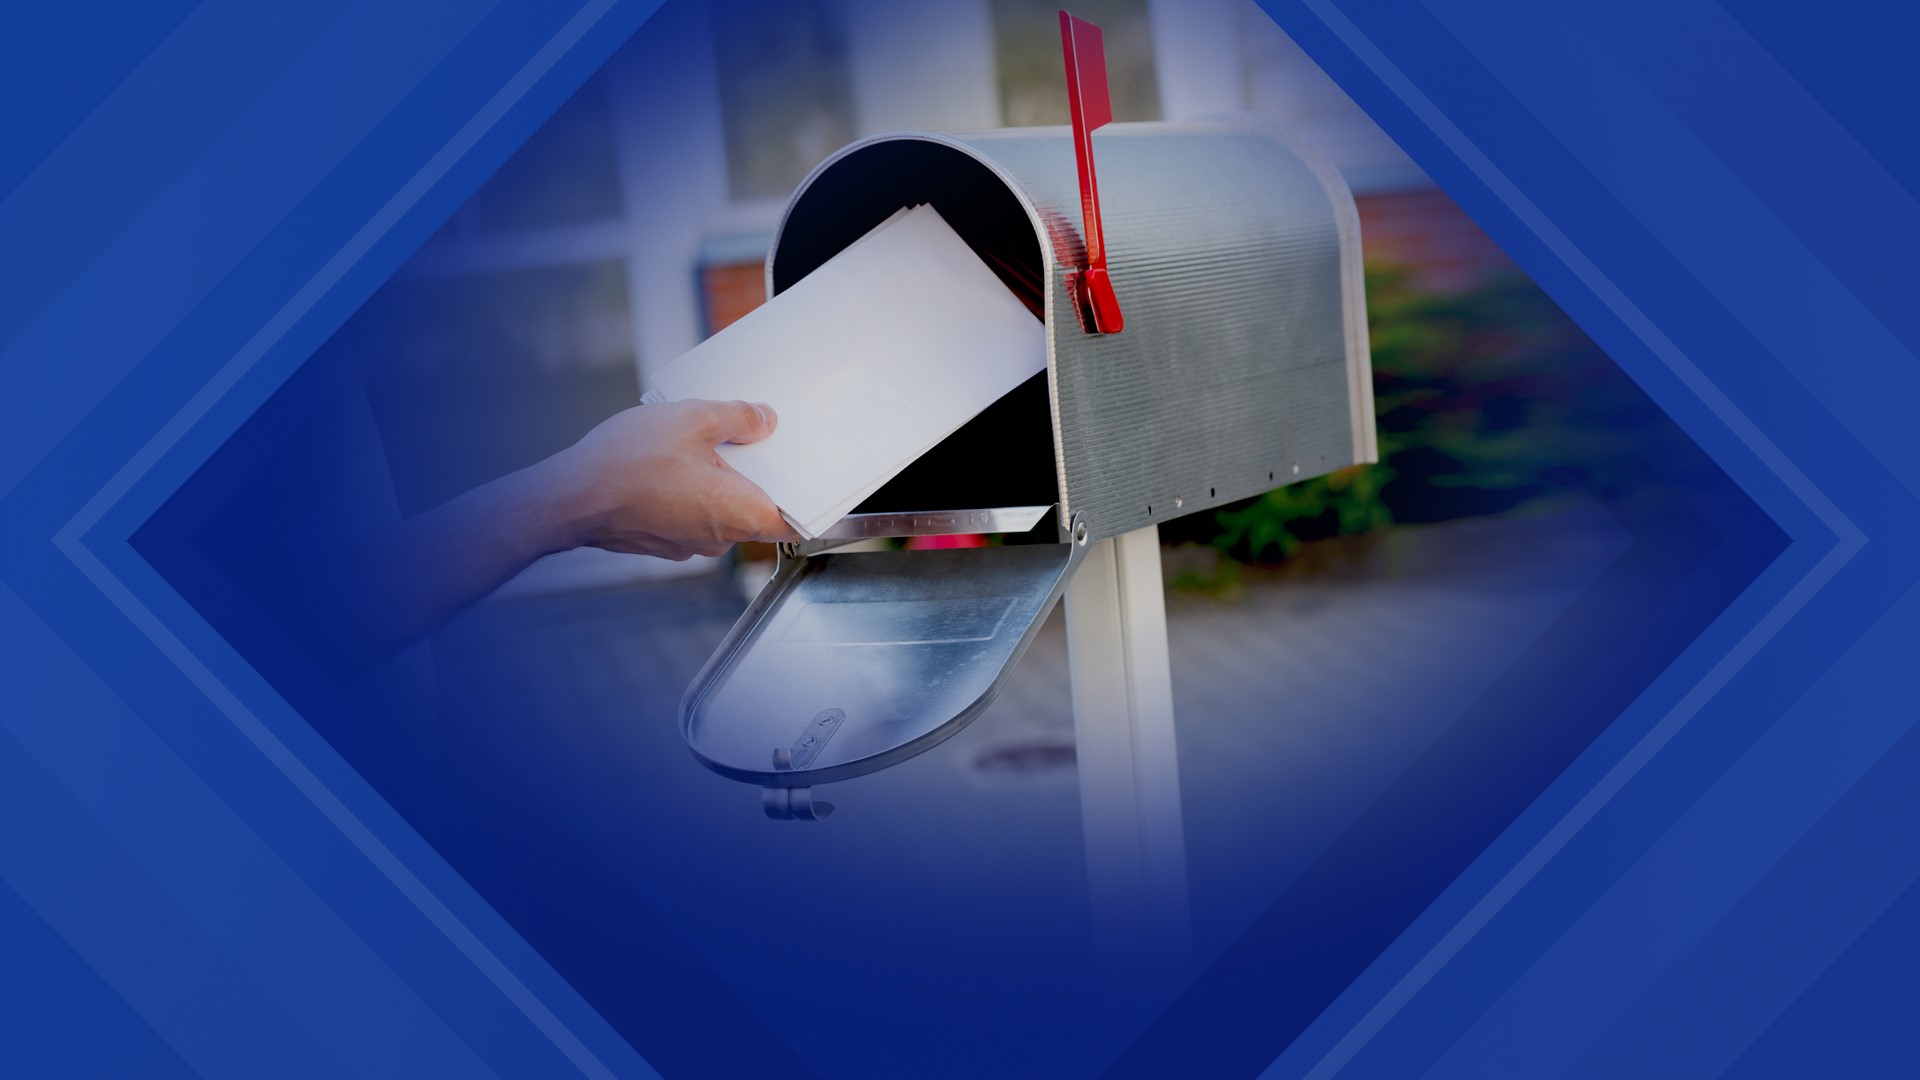 Dickson City police have received several calls since Saturday about opened mail in and around their mailboxes and they're asking for the community's help.